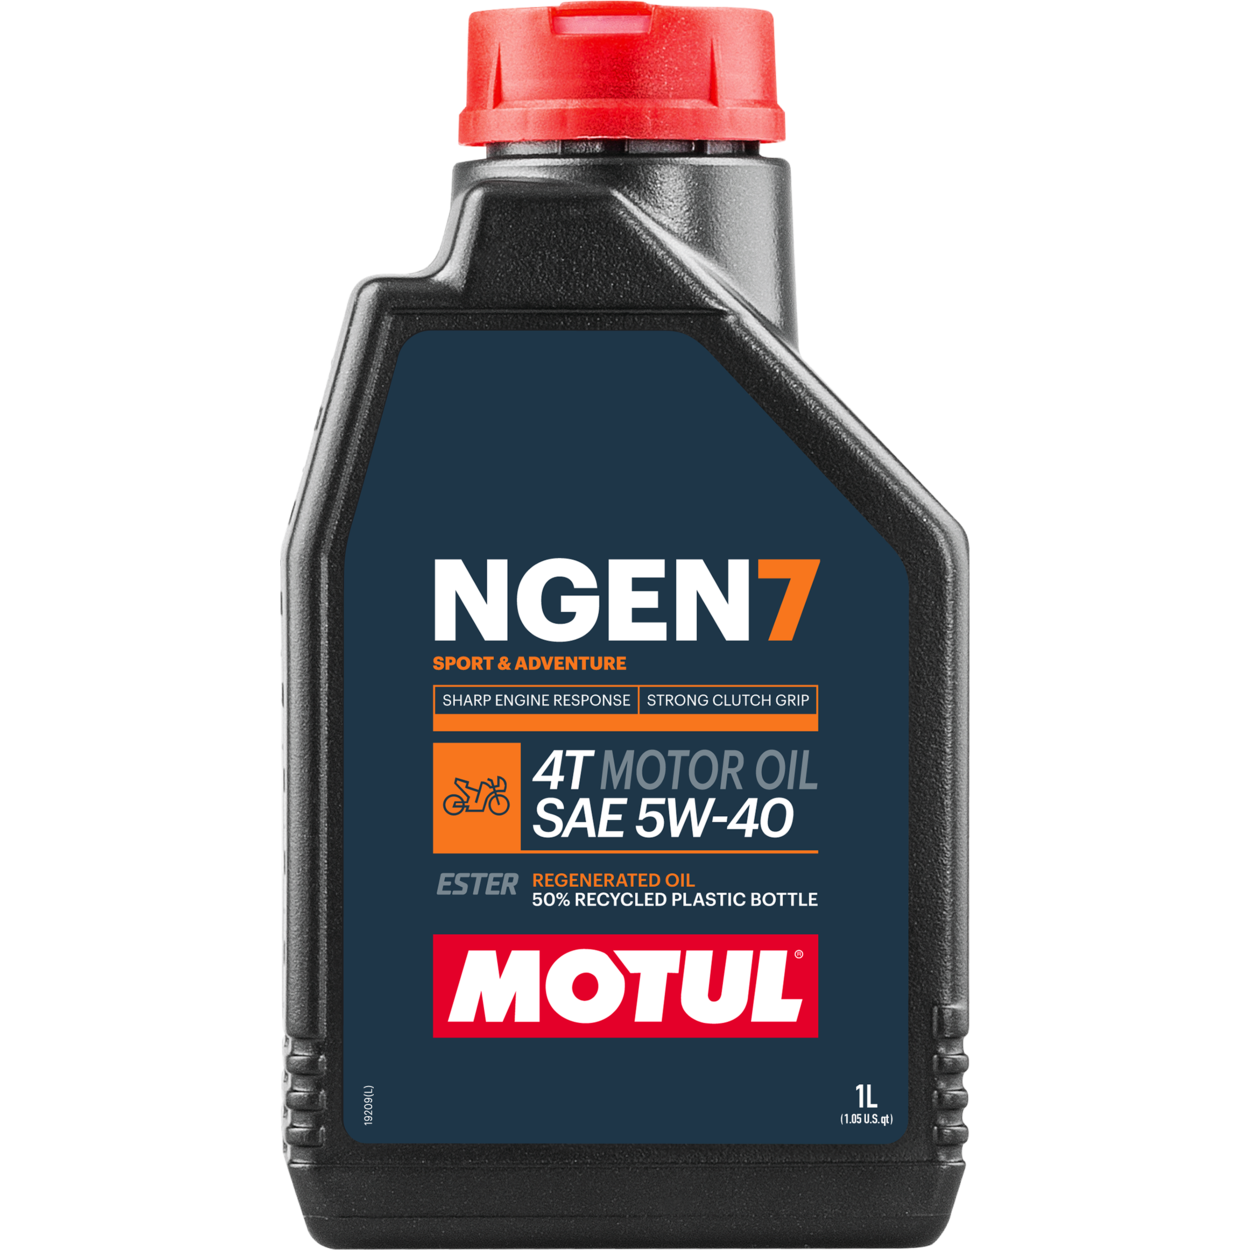 111826-1 MOTUL NGEN 7 5W-40 4T is a best-in-class 4-stroke motor oil based on a combination of finest virgin base oils and additives blended with synthetic esters and high quality regenerated oils.